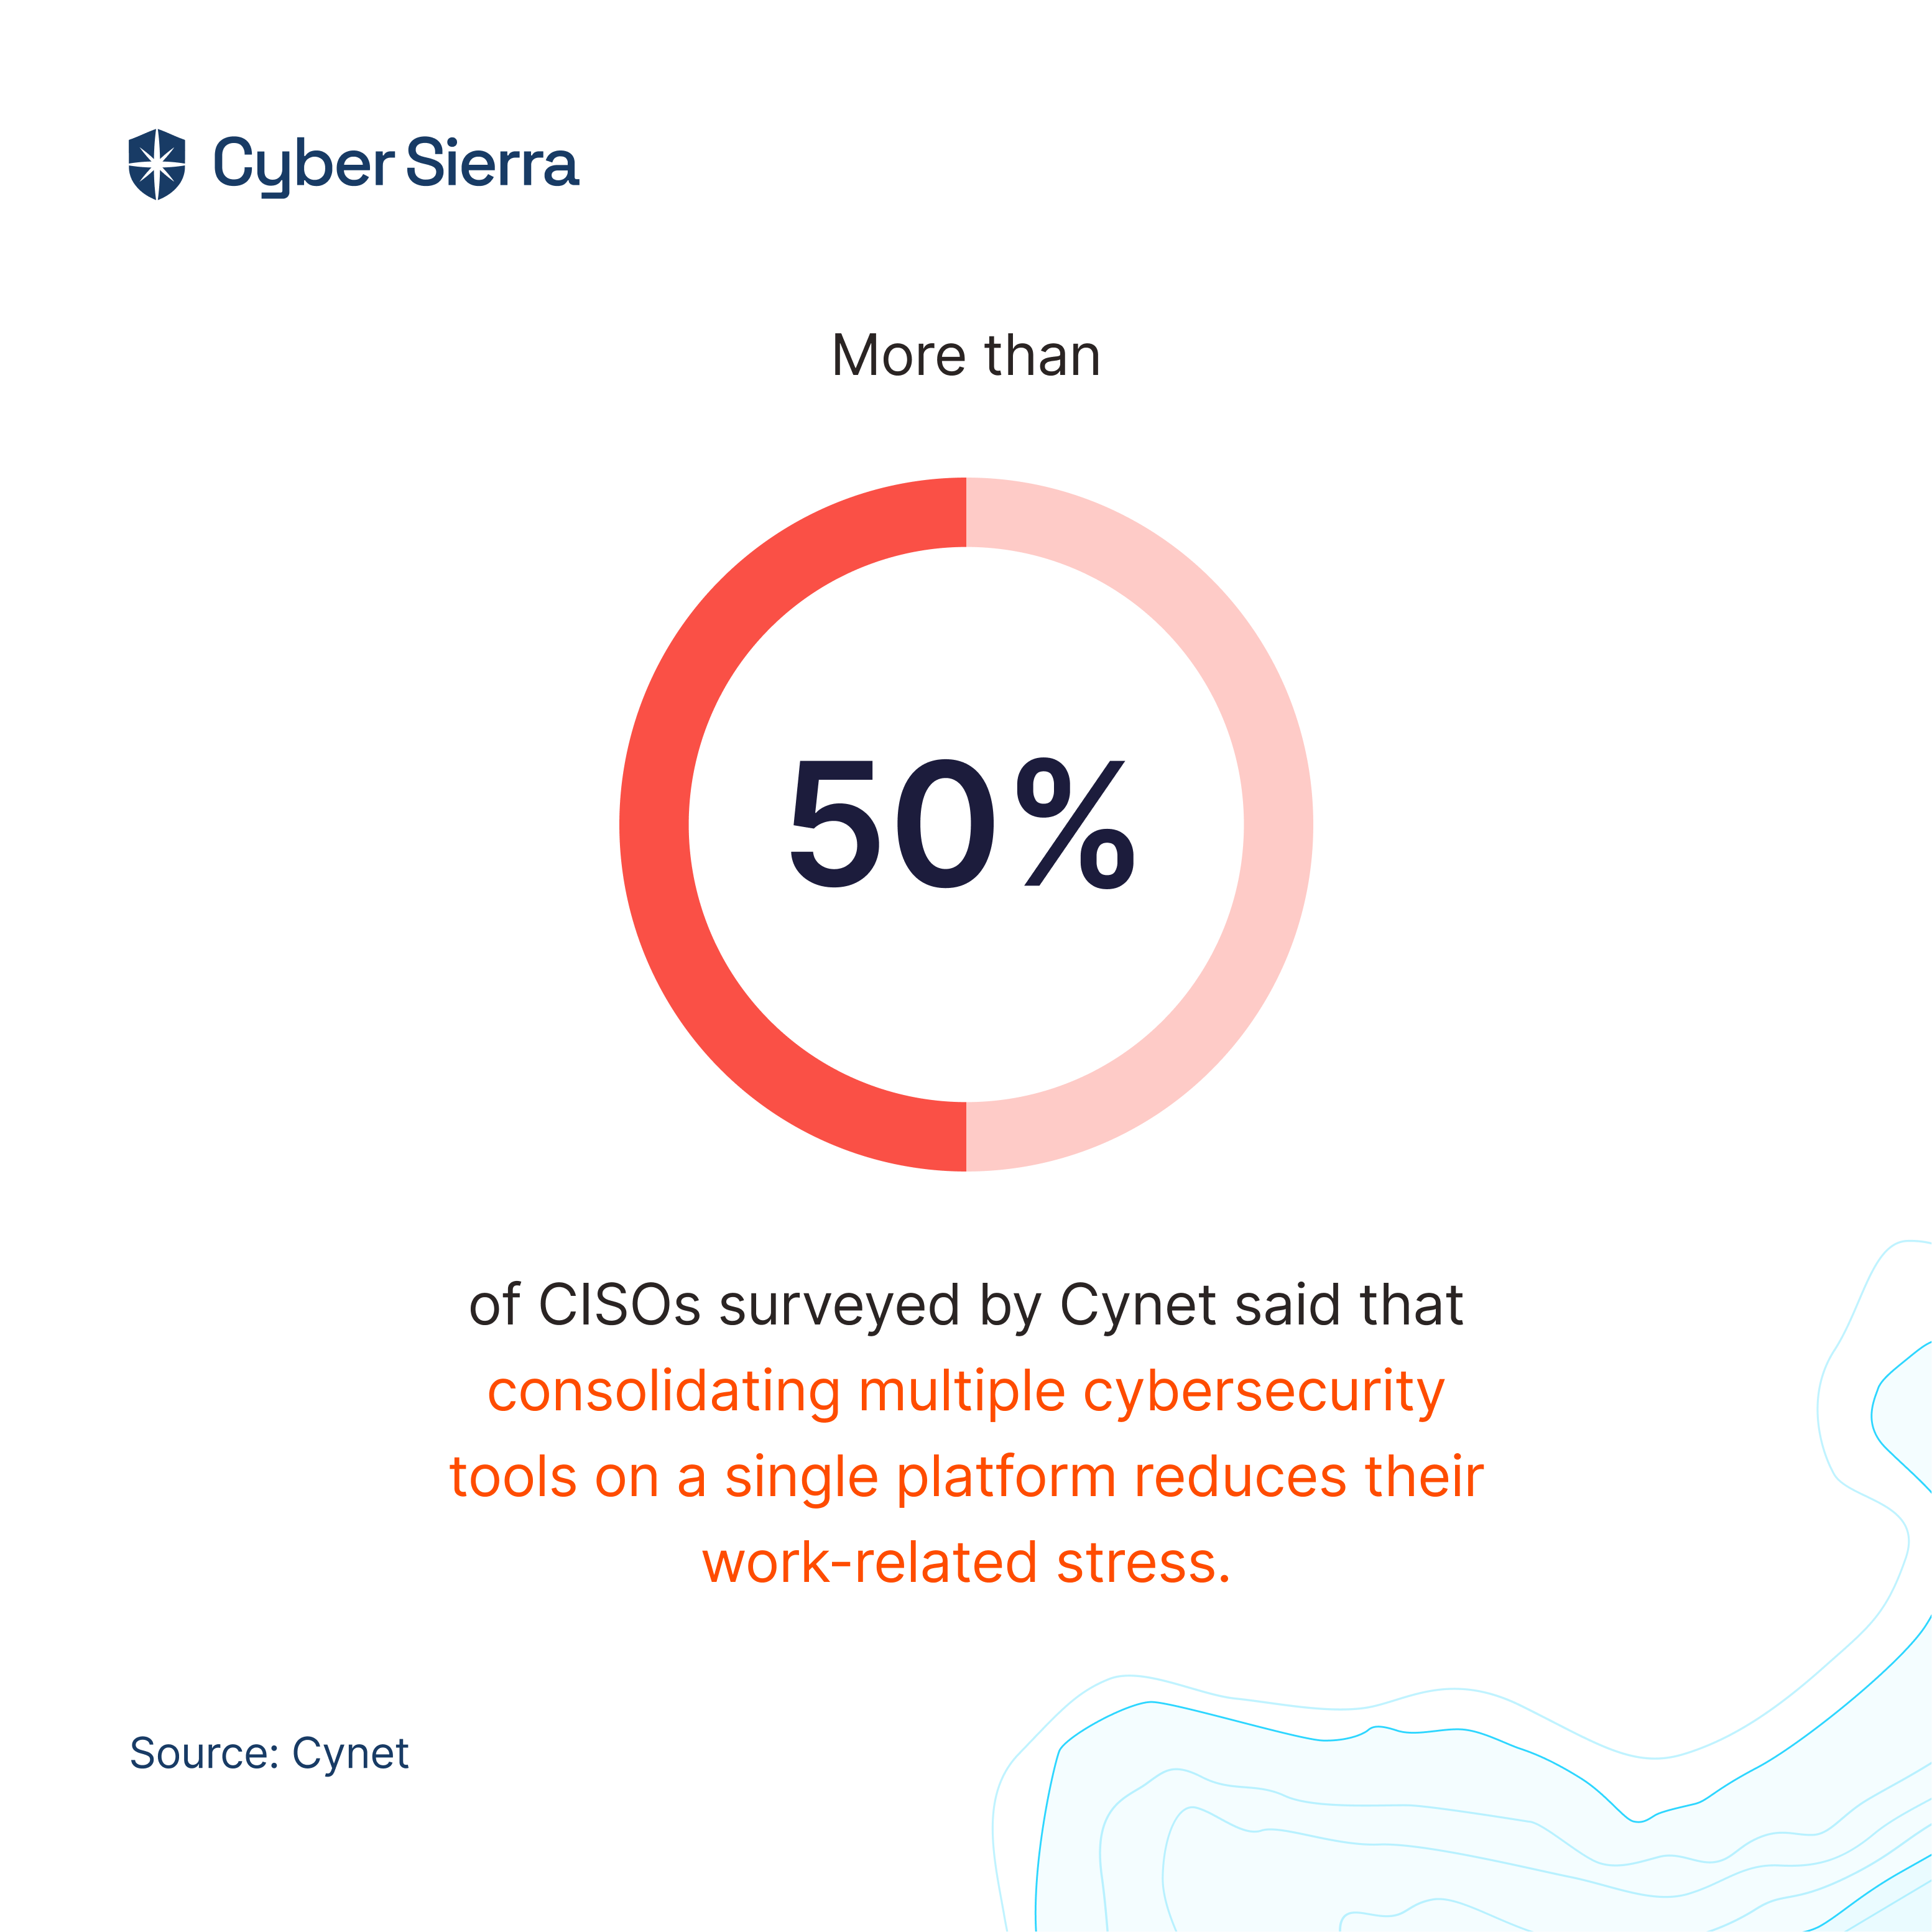 Cynet’s CISO Study confirmed this: using multiple tools on a single platform can reduces the work stress